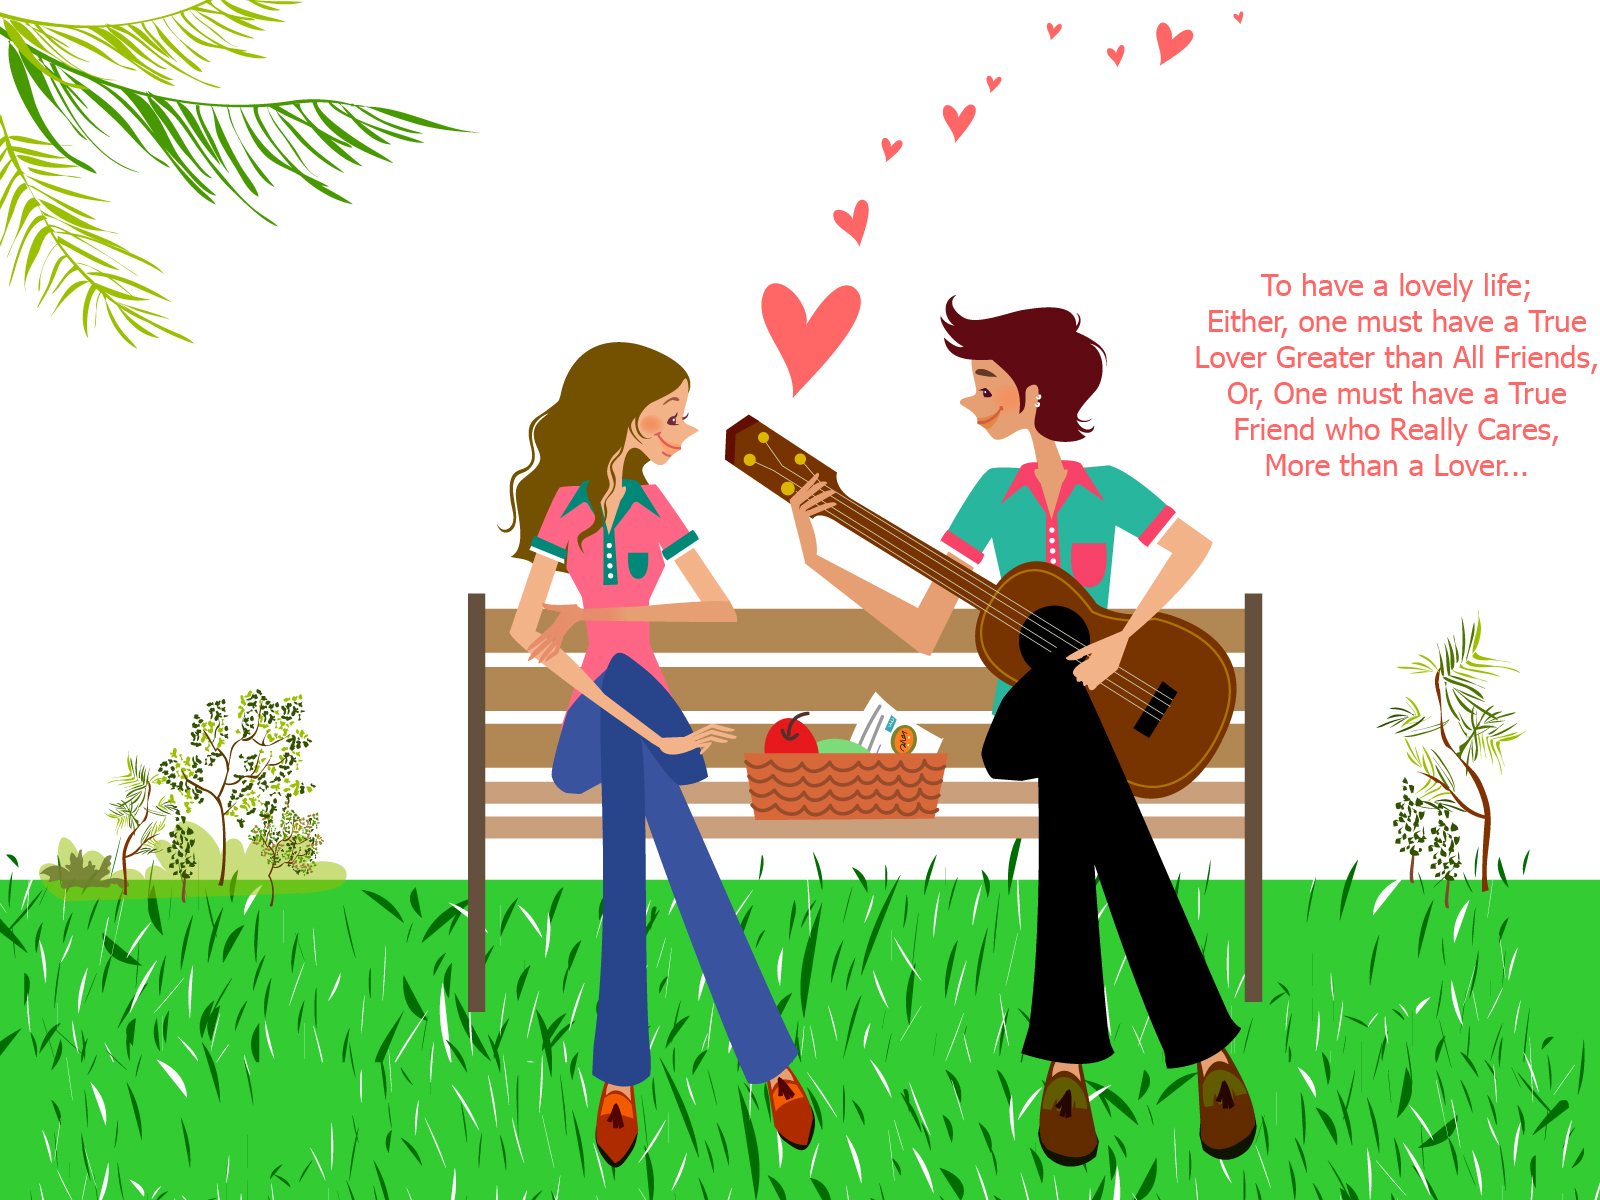 beautiful wallpapers of friendship love,people in nature,cartoon,illustration,friendship,happy